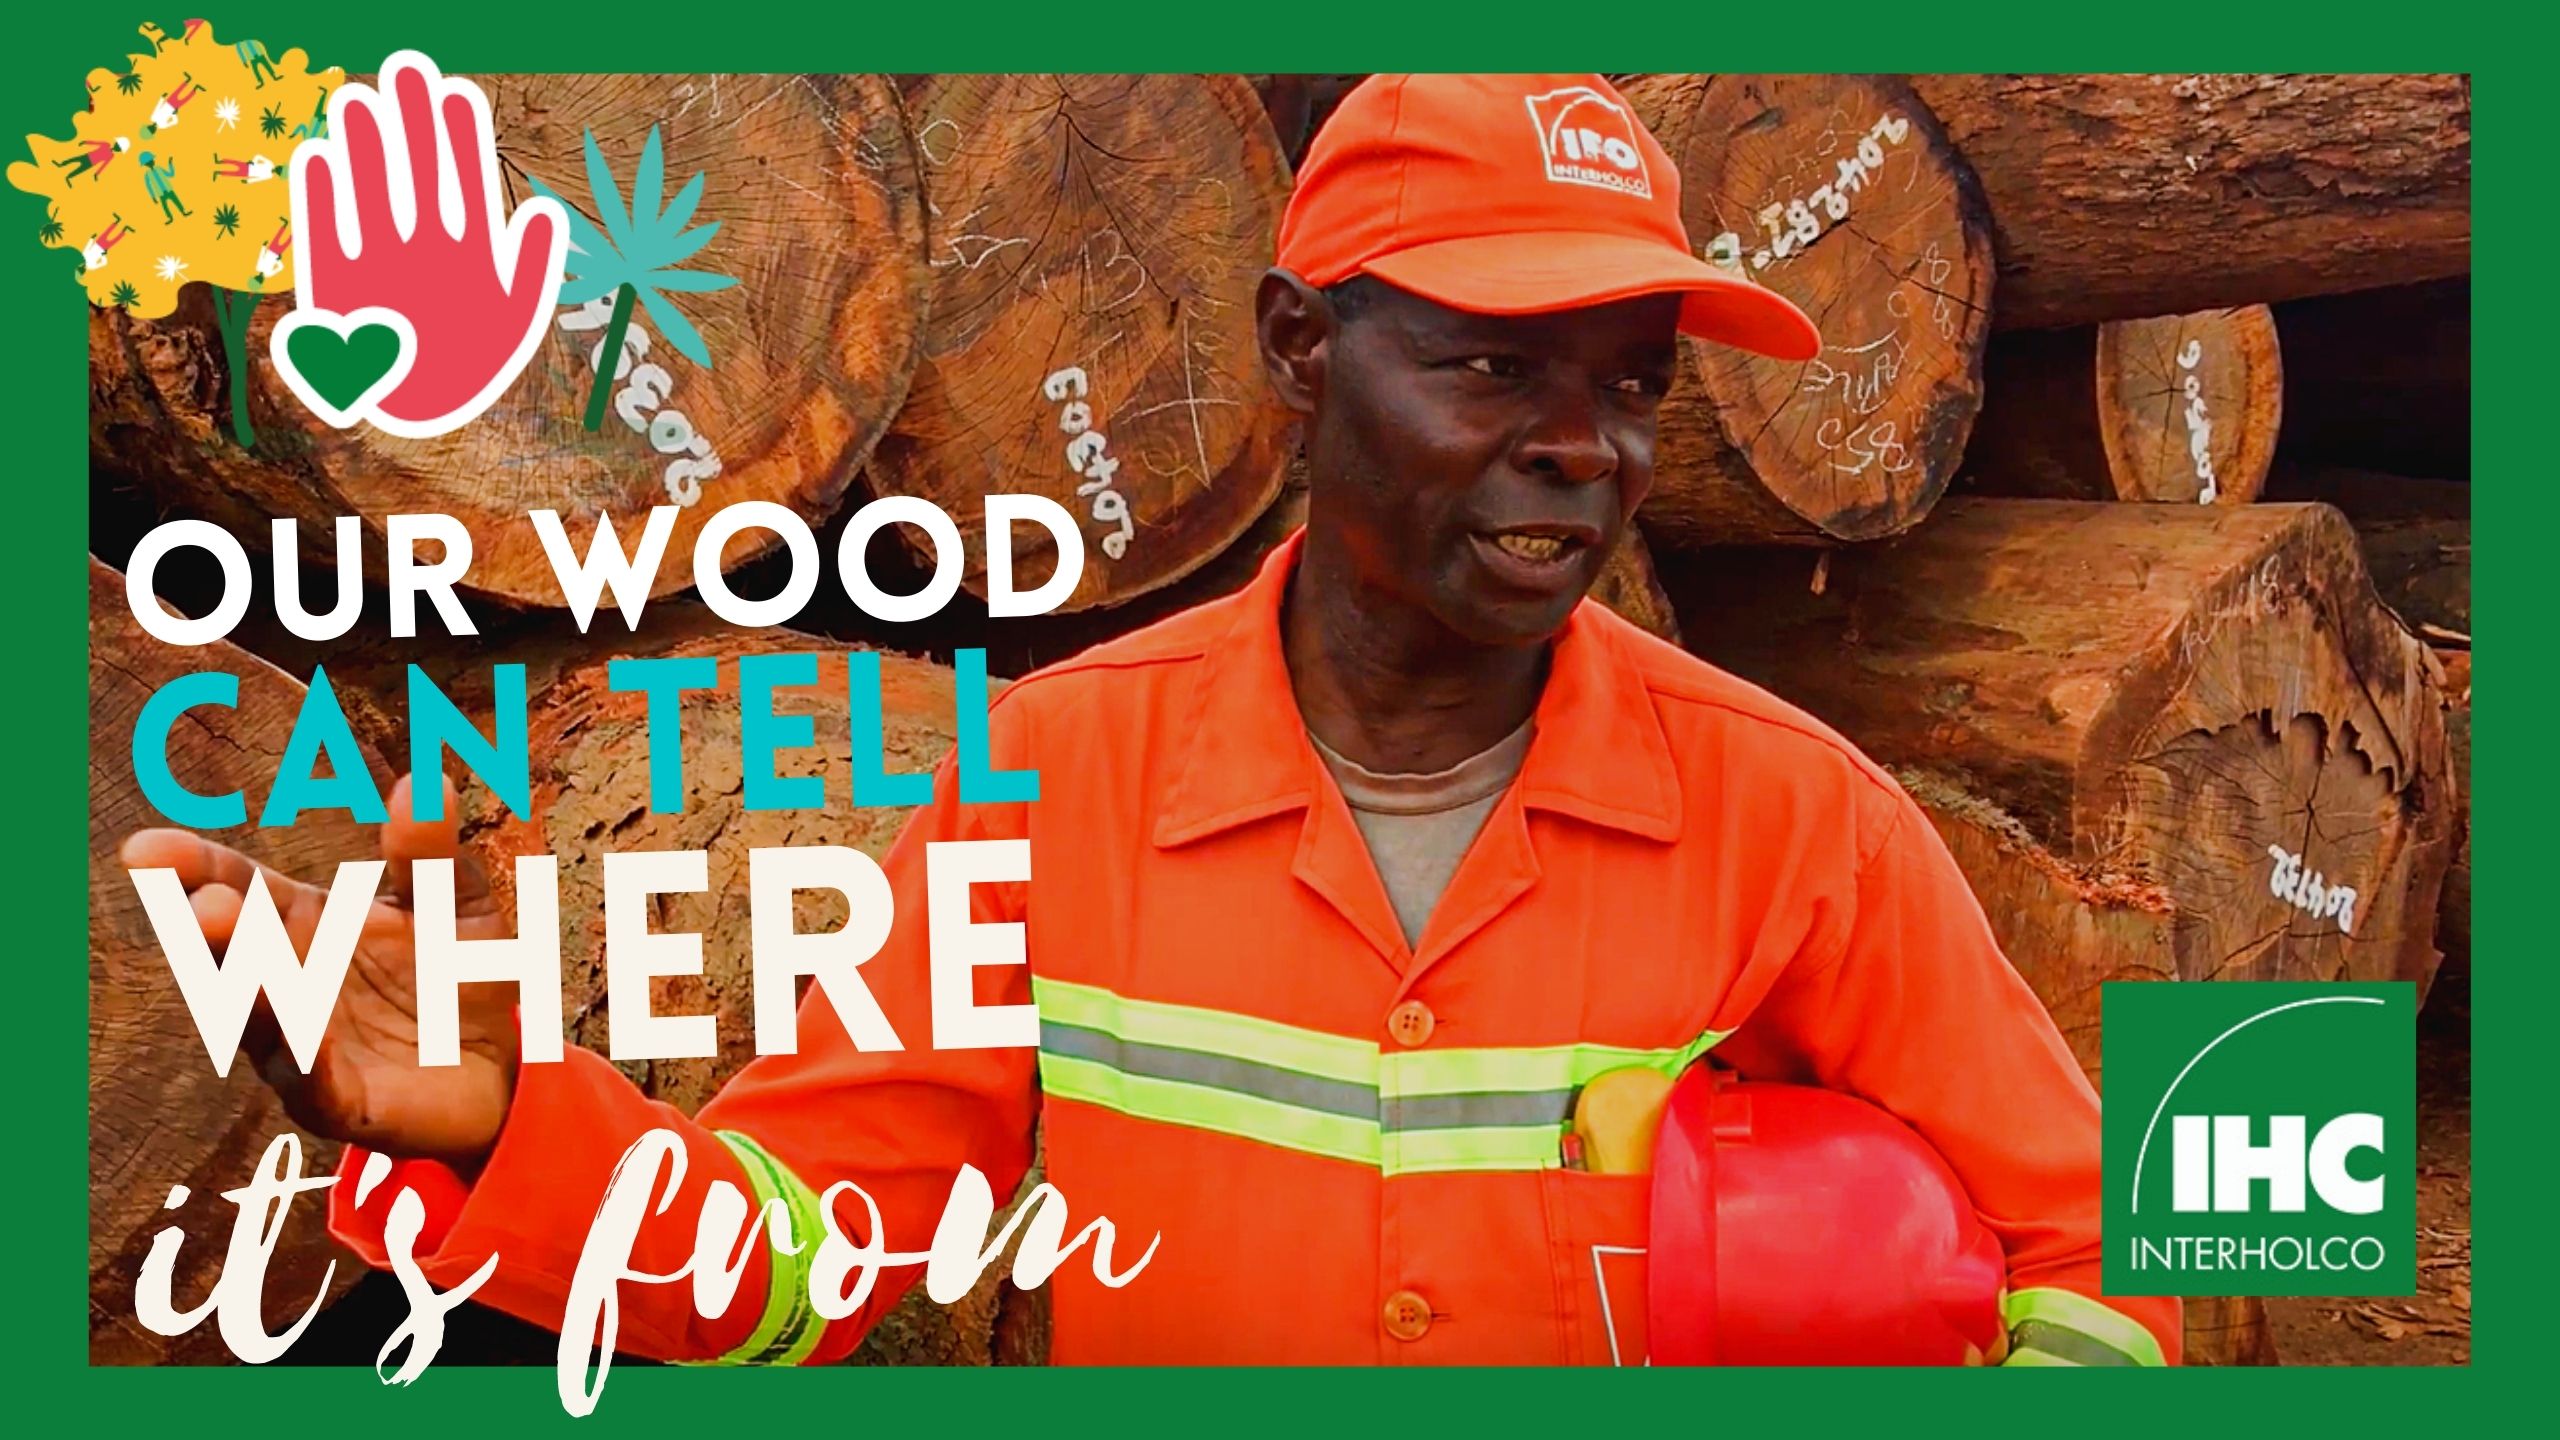 Talking wood: "Our wood can tell where it’s from